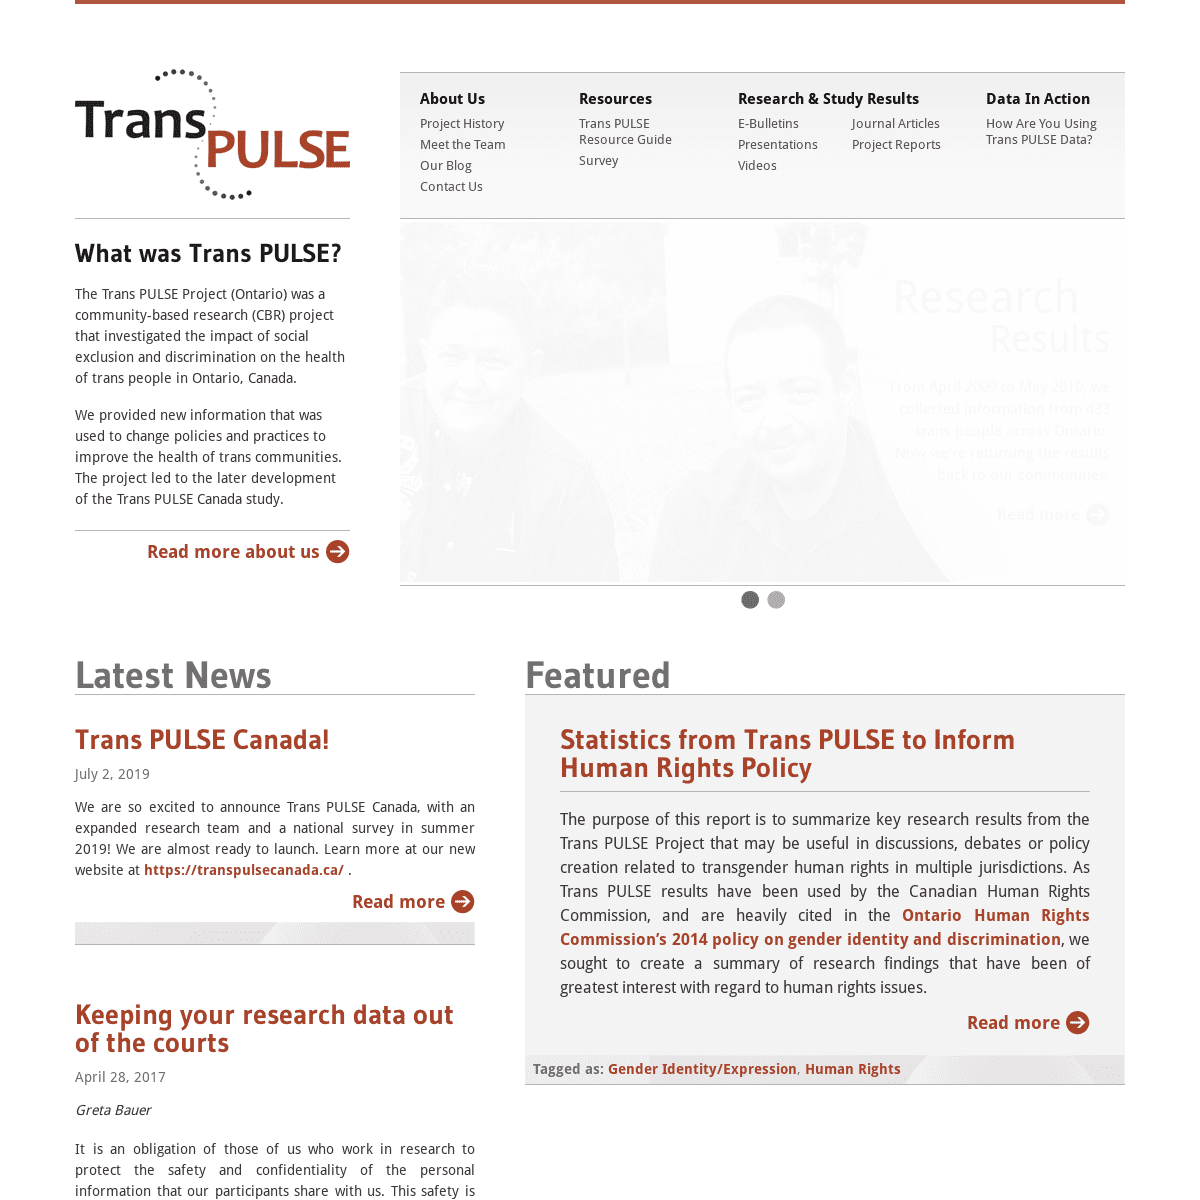 A complete backup of https://transpulseproject.ca